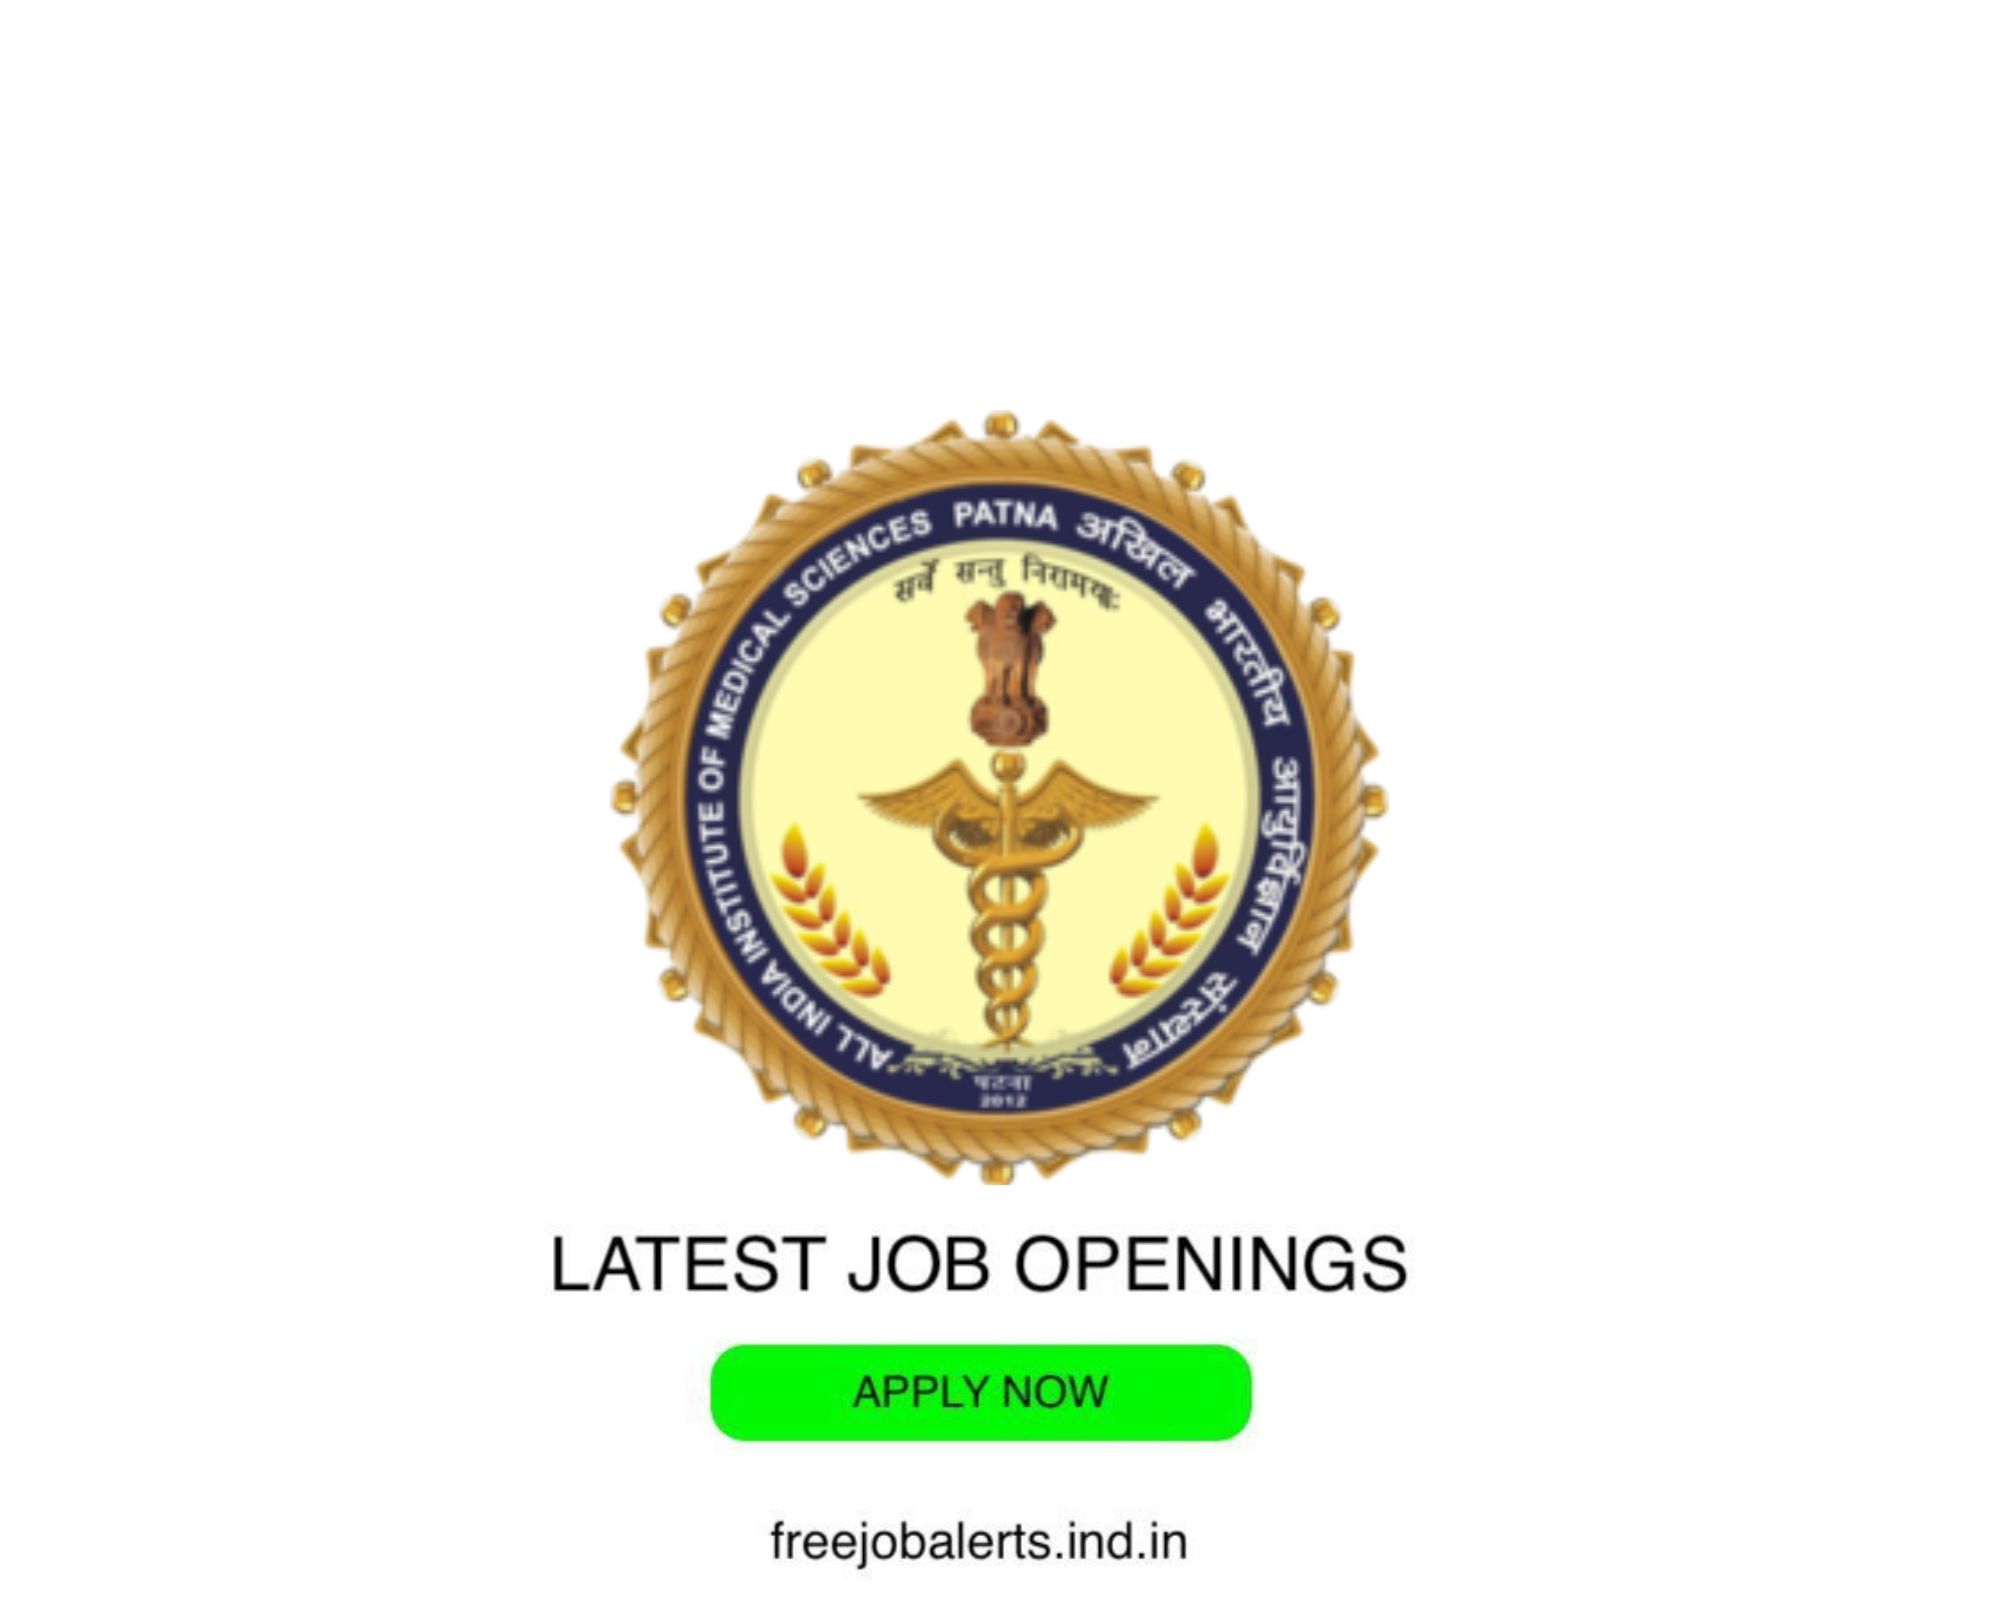 AIIMS - All India Institute of Medical Sciences - Latest Govt job openings - Free job alerts, Indian Govt Jobs